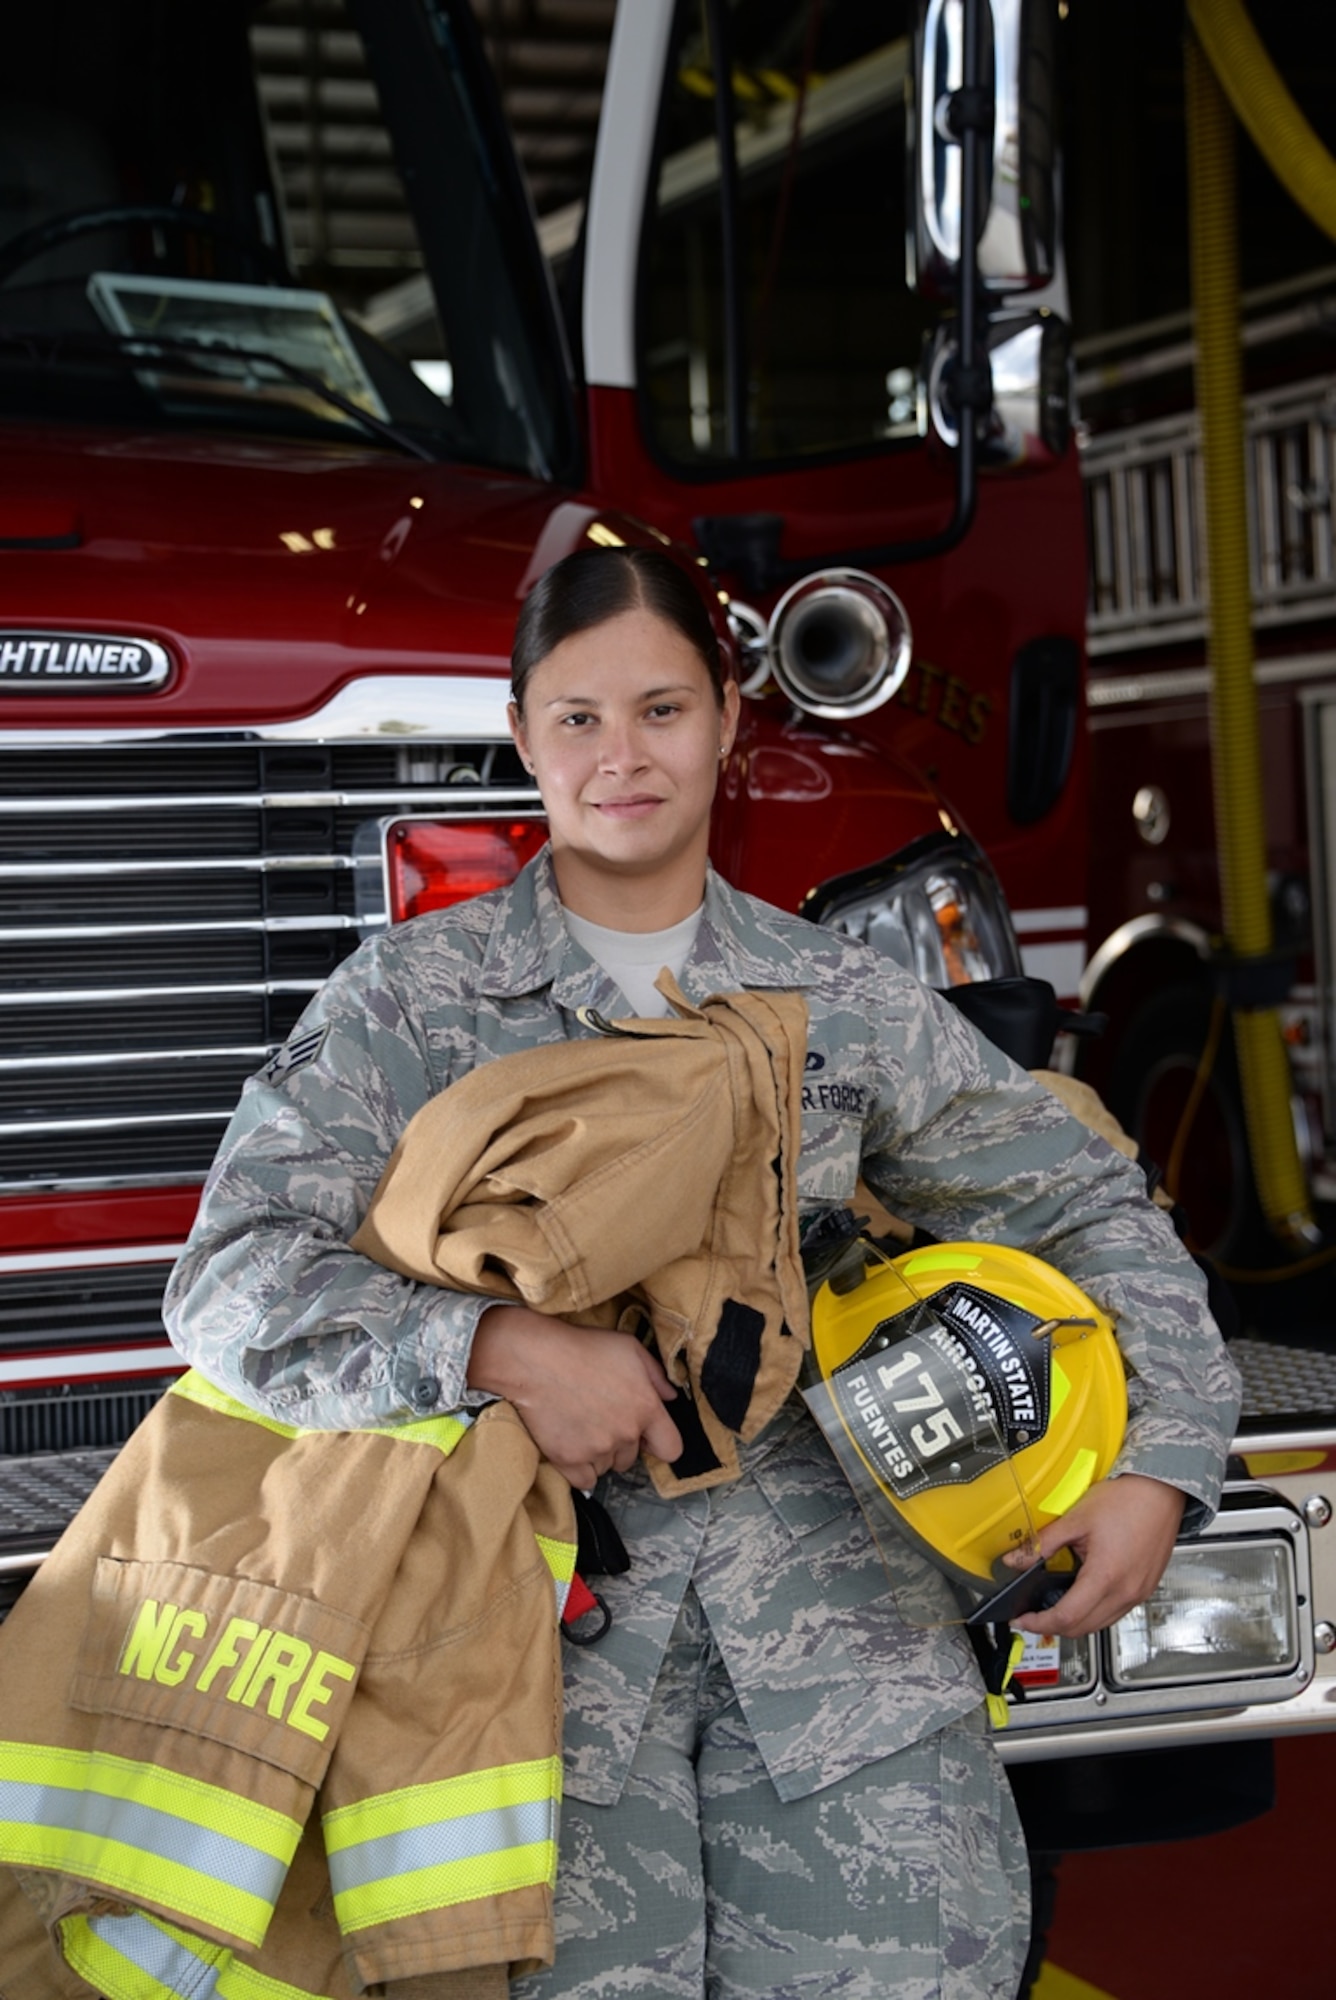 Senior Airman Sheila M. Fuentes is a full-time firefighter at Warfield Air National Guard Base; she left her unit and home in Puerto Rico to pursue a career in firefighting in the Maryland Air National Guard. (U.S. Air National Guard photo by Senior Master Sgt. Ed Bard/RELEASED)